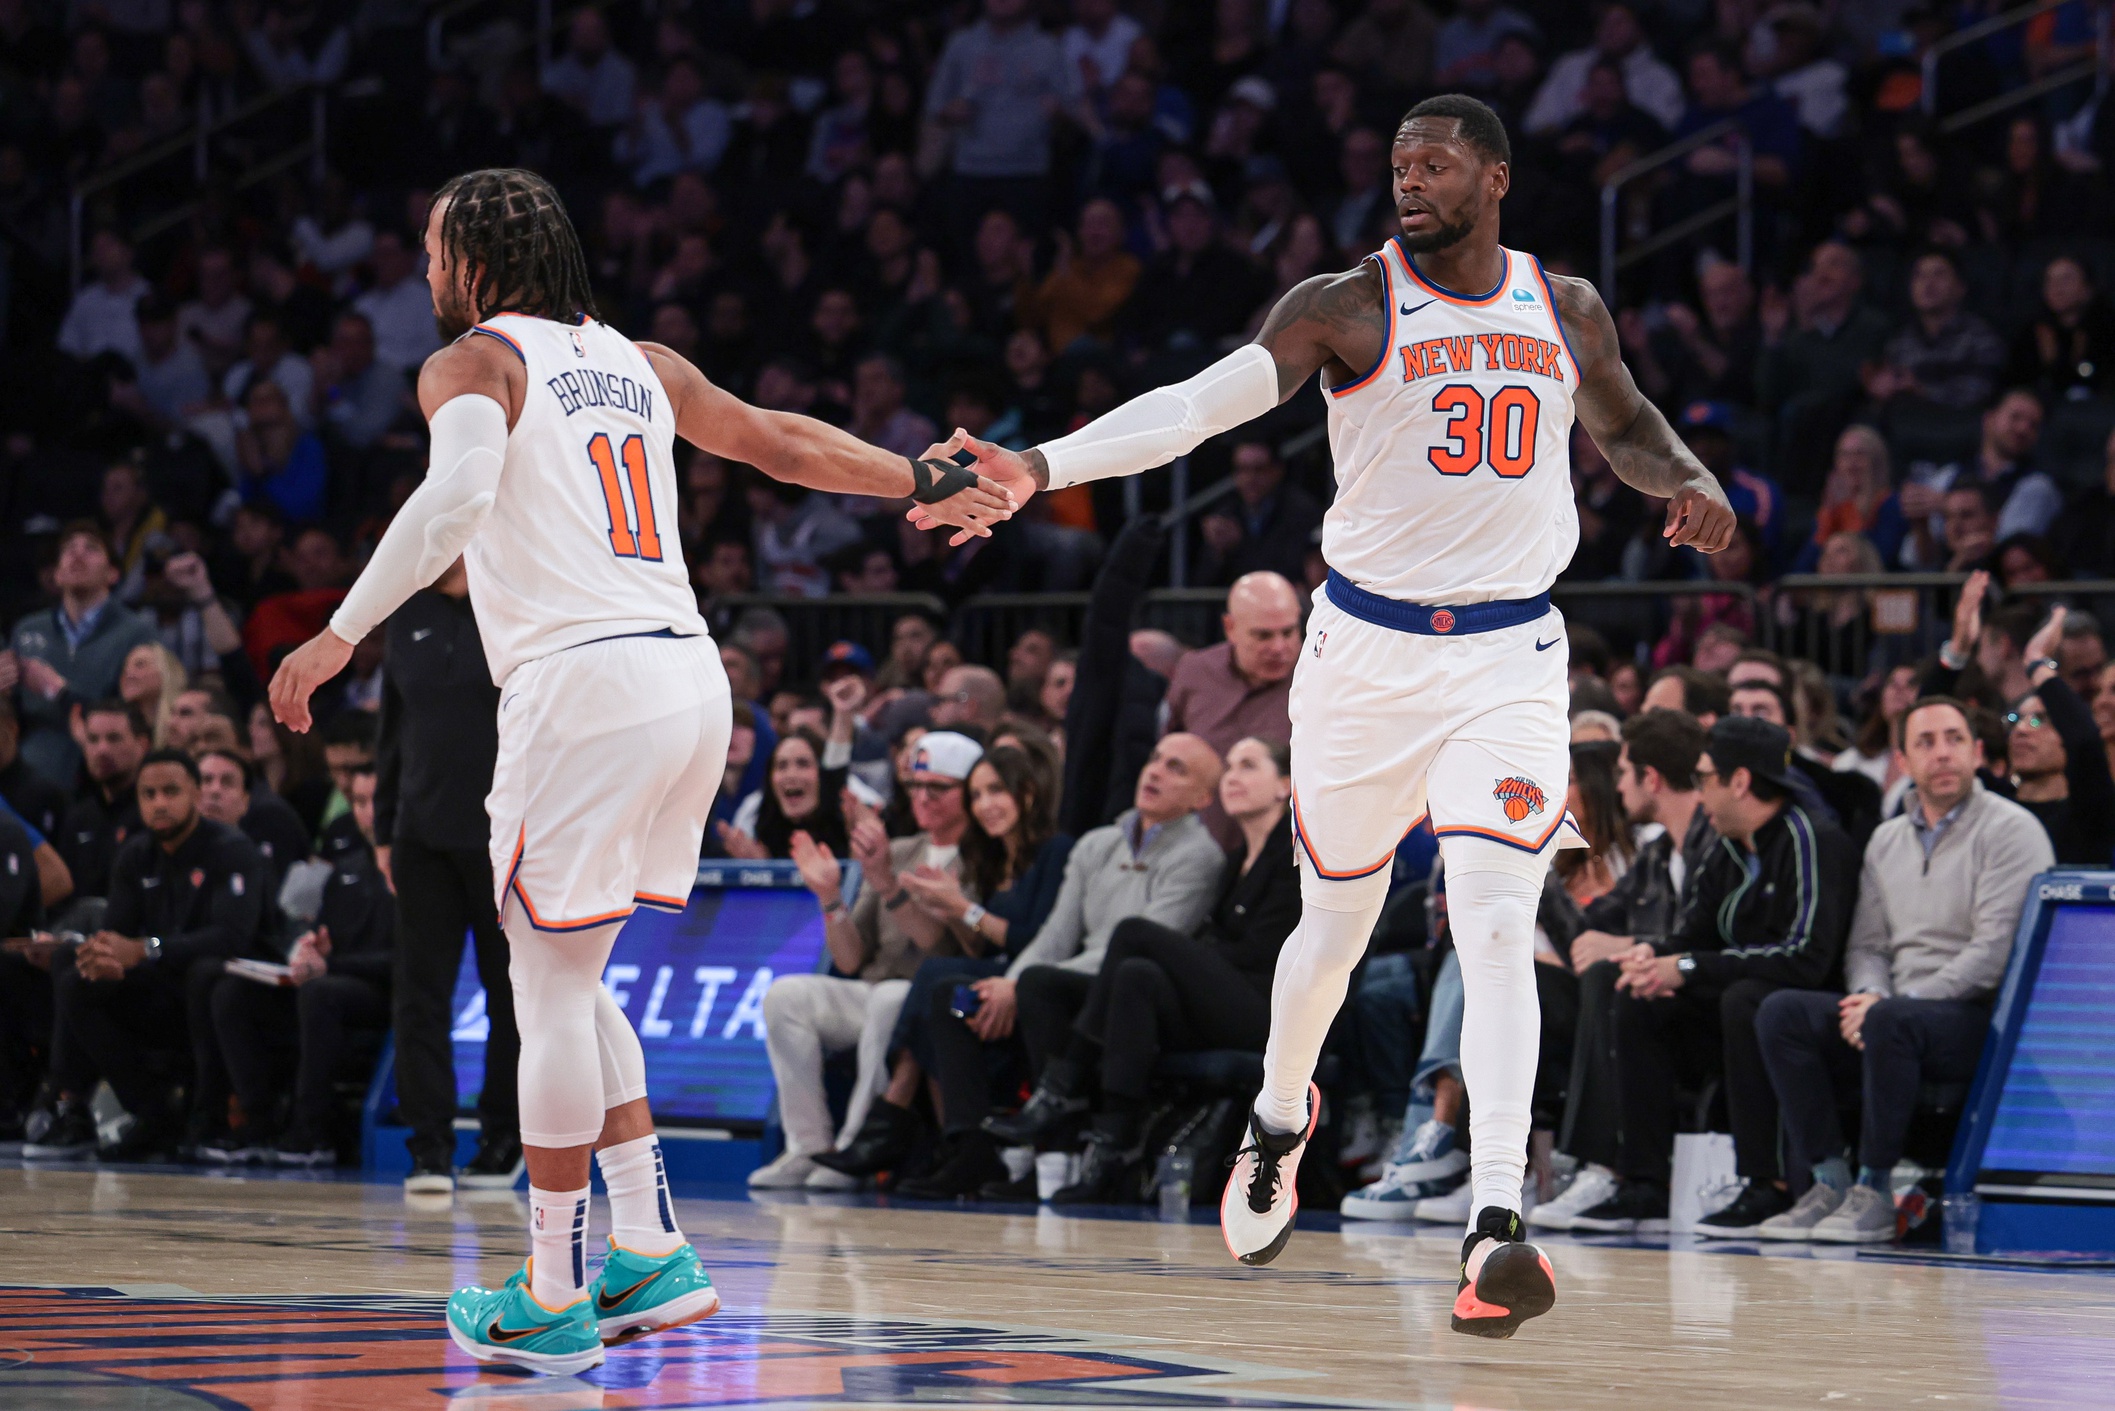 New York Knicks forward Julius Randle (30) slaps hands with guard Jalen Brunson (11) after a basket during the second half against the Detroit Pistons at Madison Square Garden.